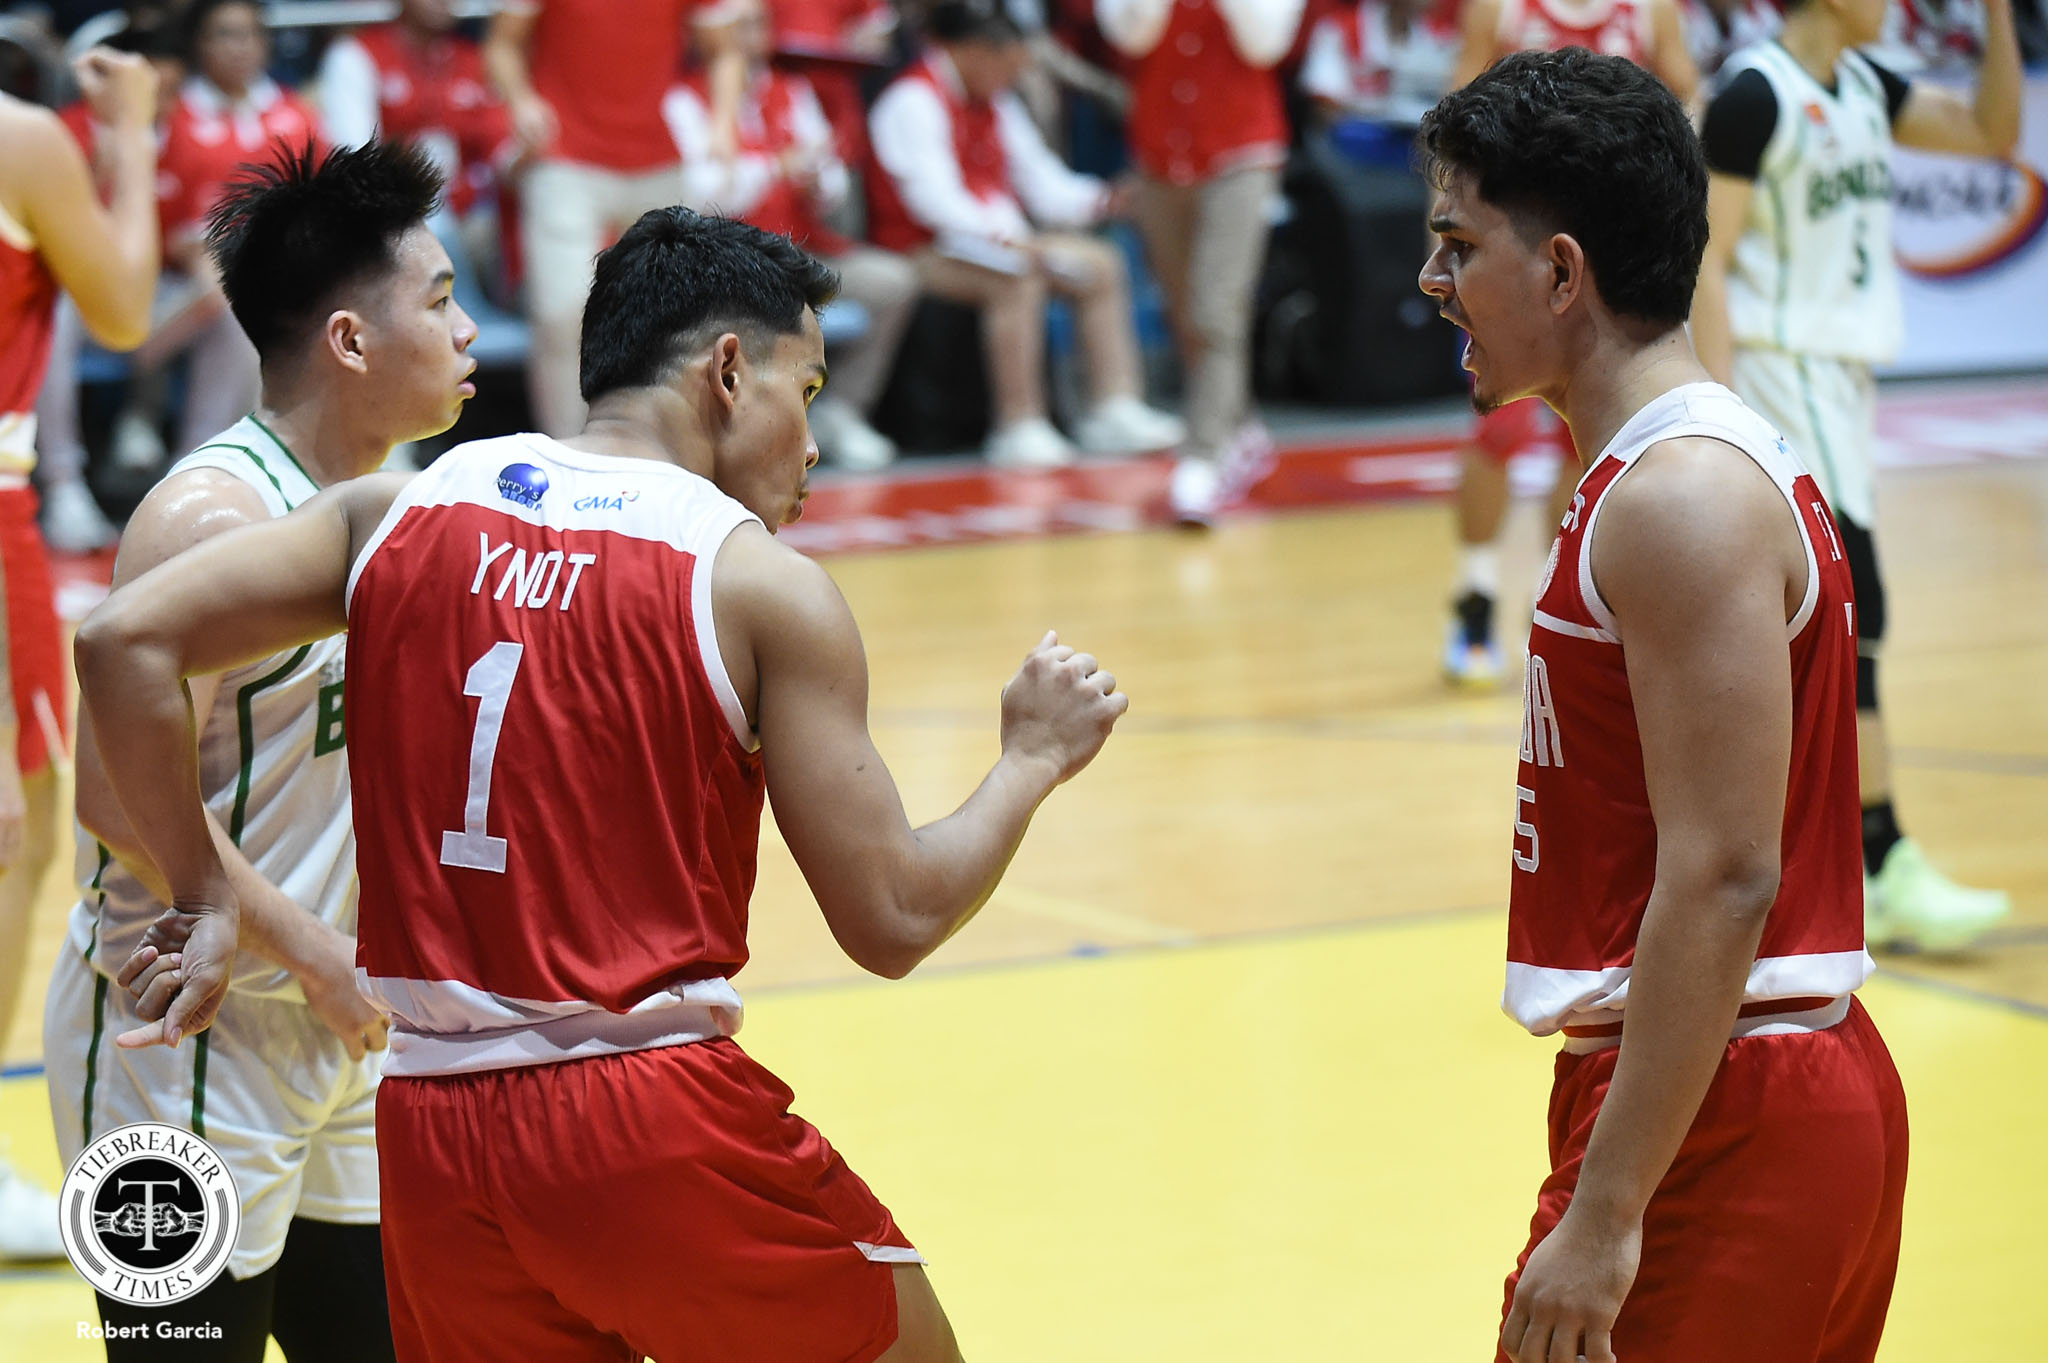 NCAA-98-CSB-vs-SBU-Winston-Ynot-2-1 Jude Roque gurantees to San Beda: 'Escueta will be one of the best college coaches' Basketball NCAA News SBC  - philippine sports news